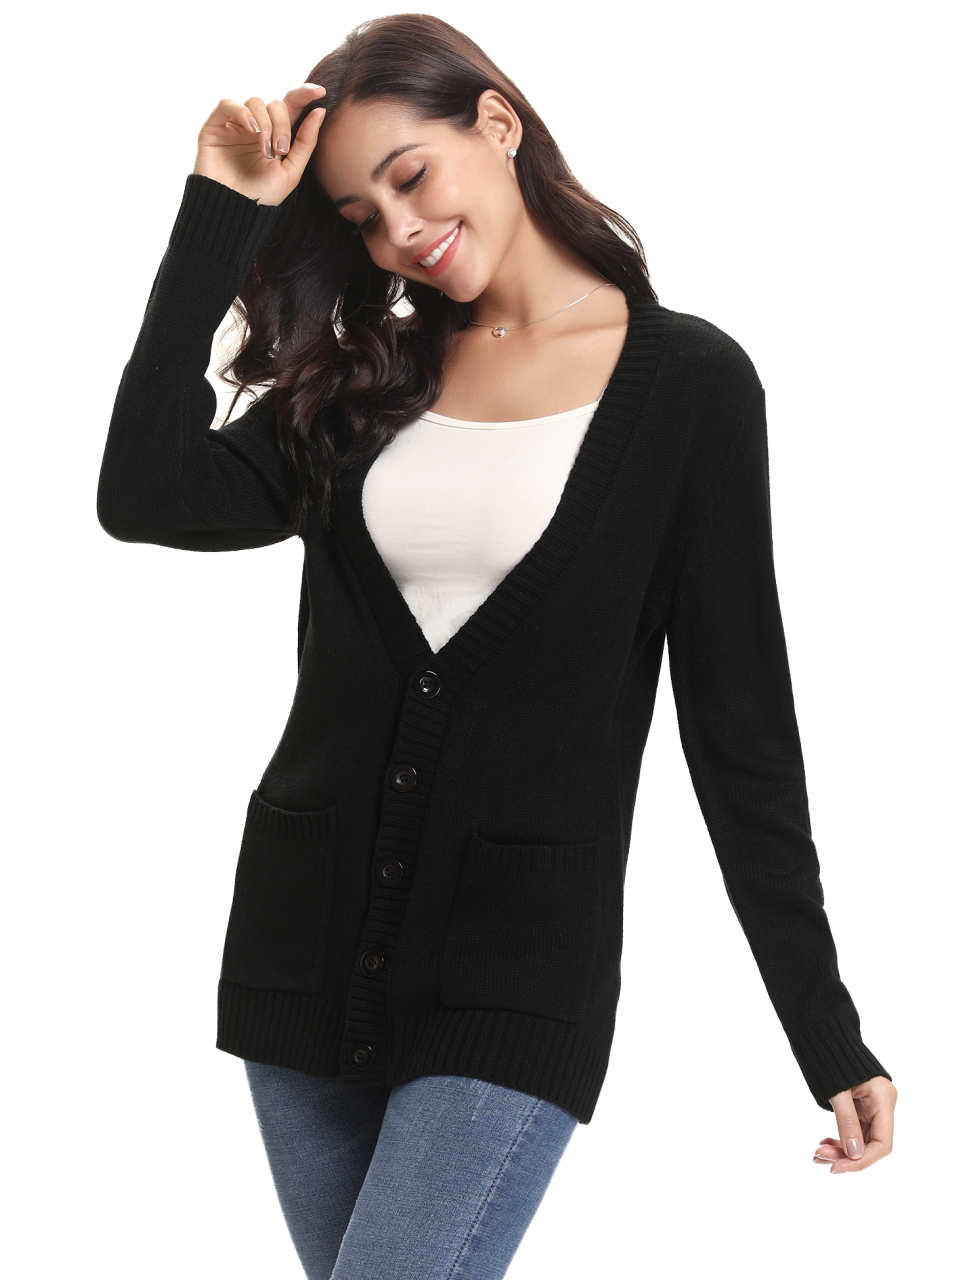 Fashion All-Match Casual Women'S Knitted Jacket